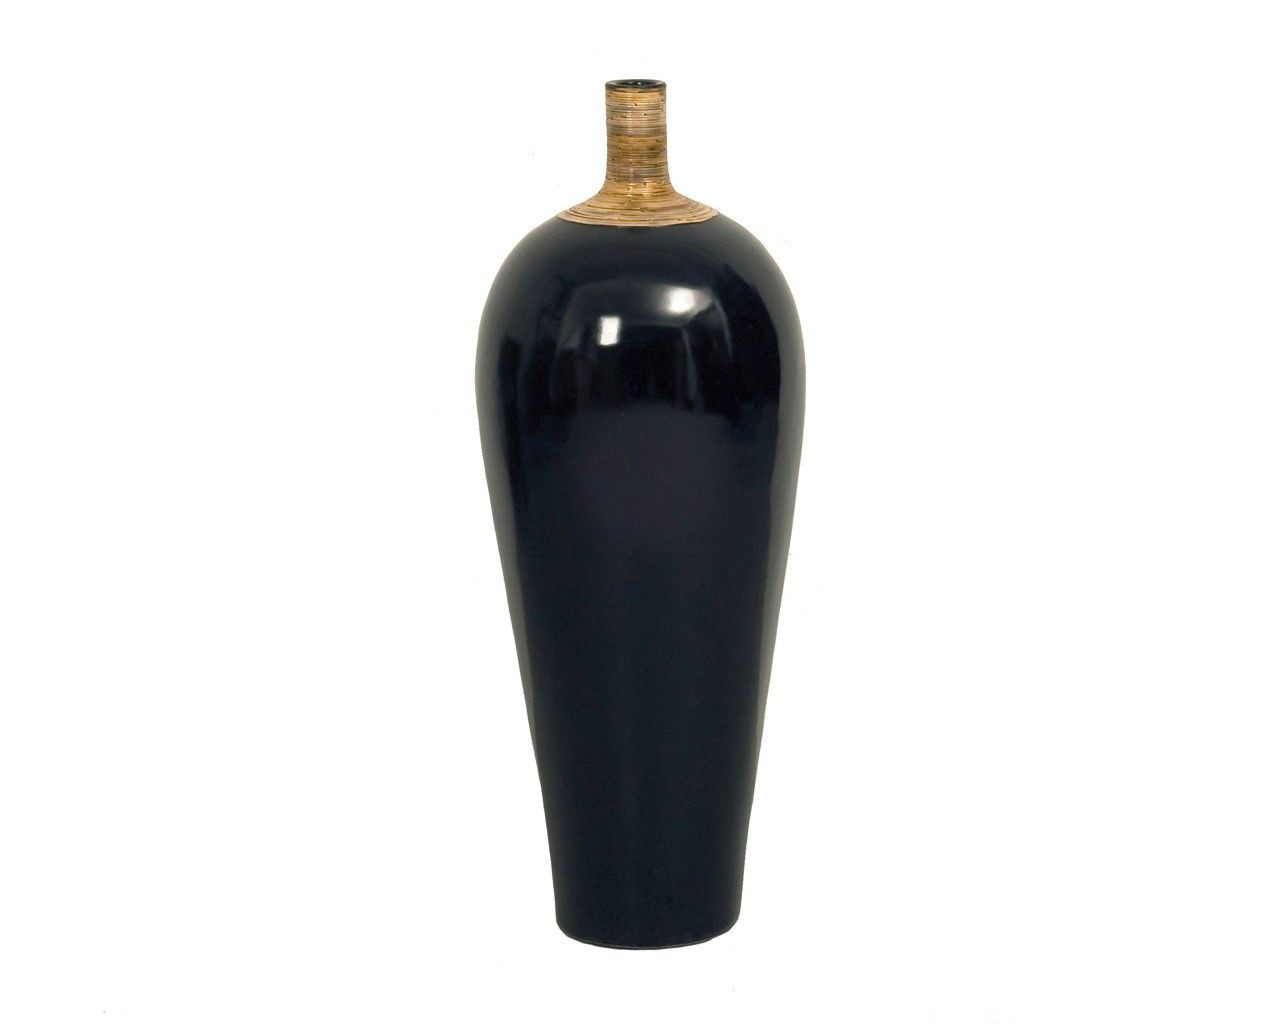 11 Famous Large Bamboo Floor Vases 2024 free download large bamboo floor vases of pinnot tulip vase black contemporary floor standing black vase for pinnot tulip vase black contemporary floor standing black vase with bamboo detail floor vase